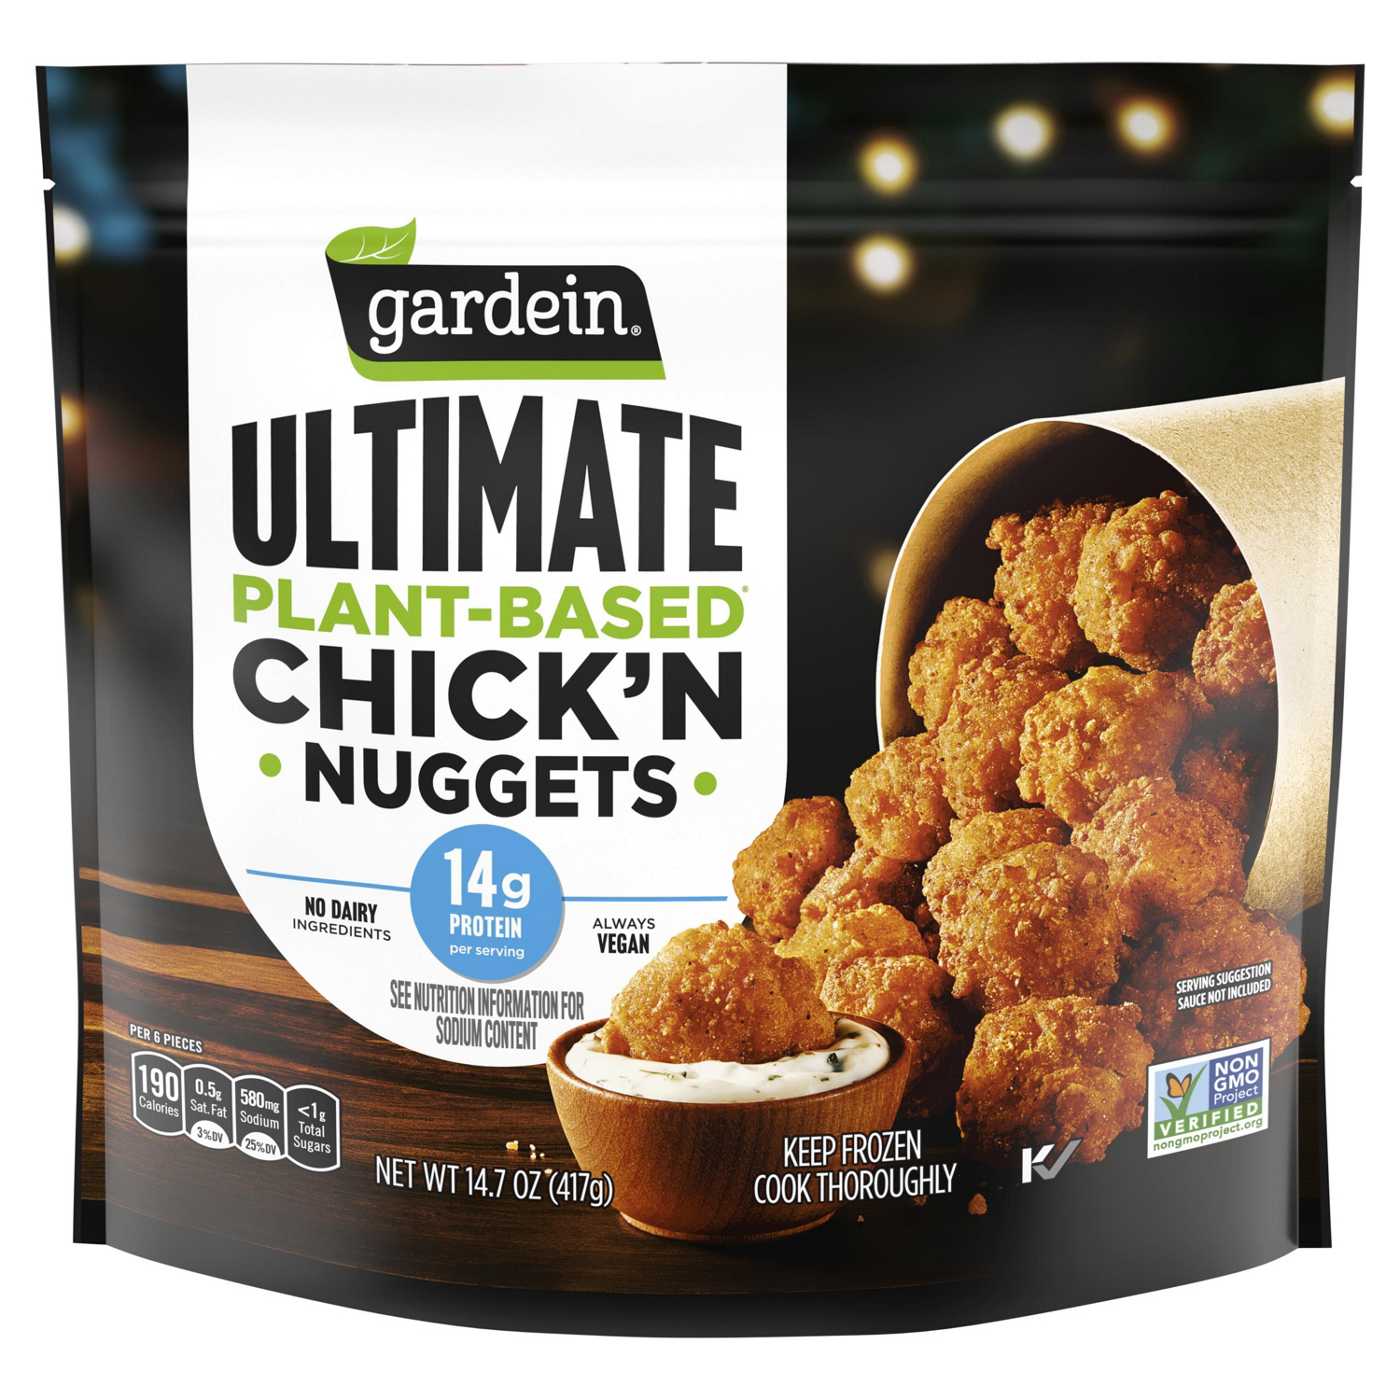 Gardein Ultimate Plant Based Chick'n Nuggets; image 1 of 4